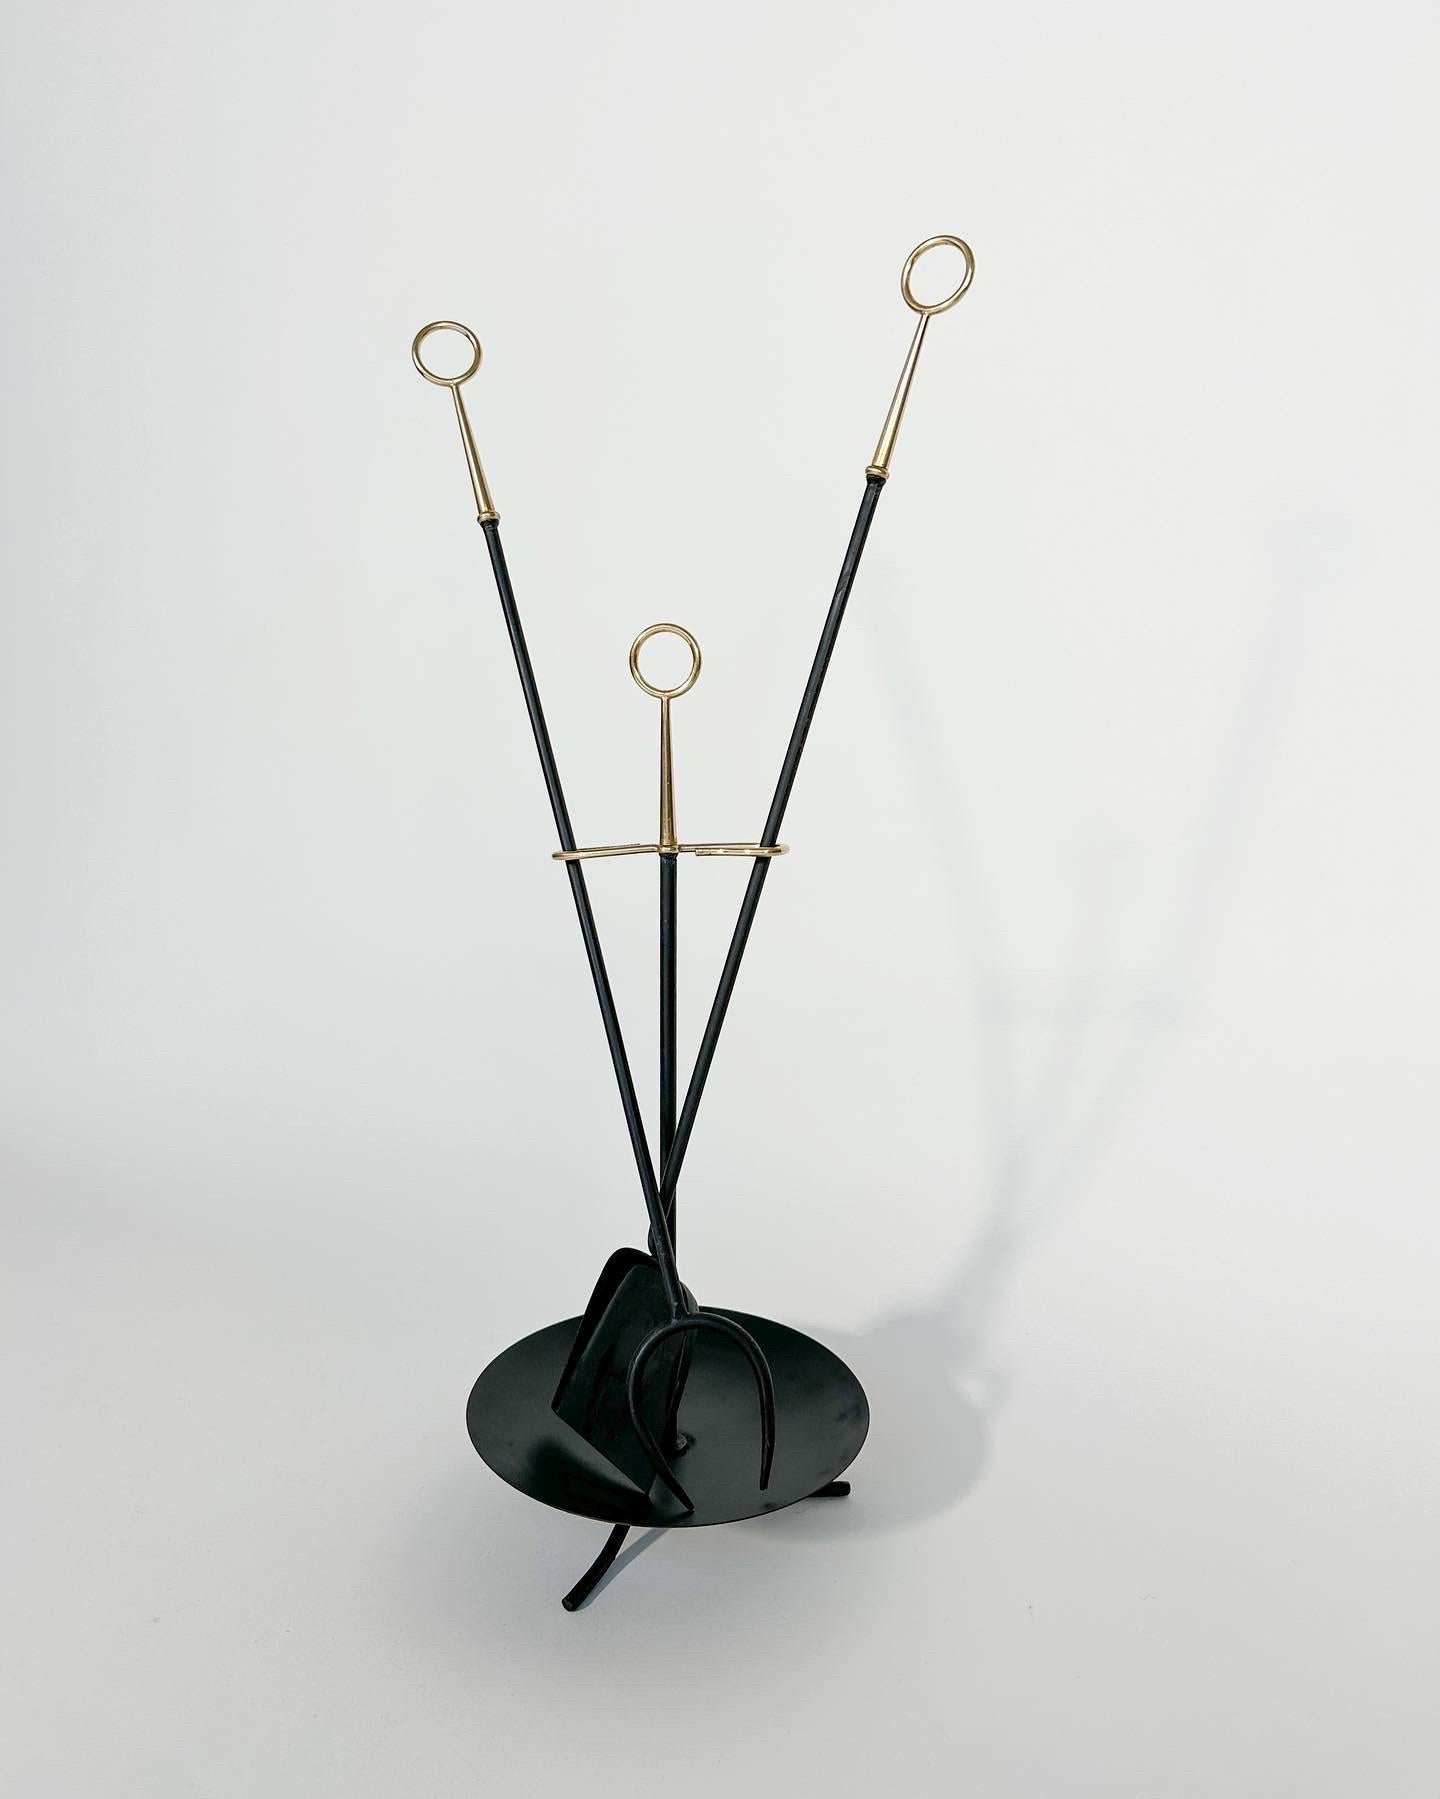 Gunnar Ander fireplace tools in black lacquered steel & brass, introduced in 1959, made by Ystad-Metall in Sweden.

The brass parts have been slightly polished, the black lacquered base is in very good condition.

Height: 70 cm
Diameter base: 23 cm